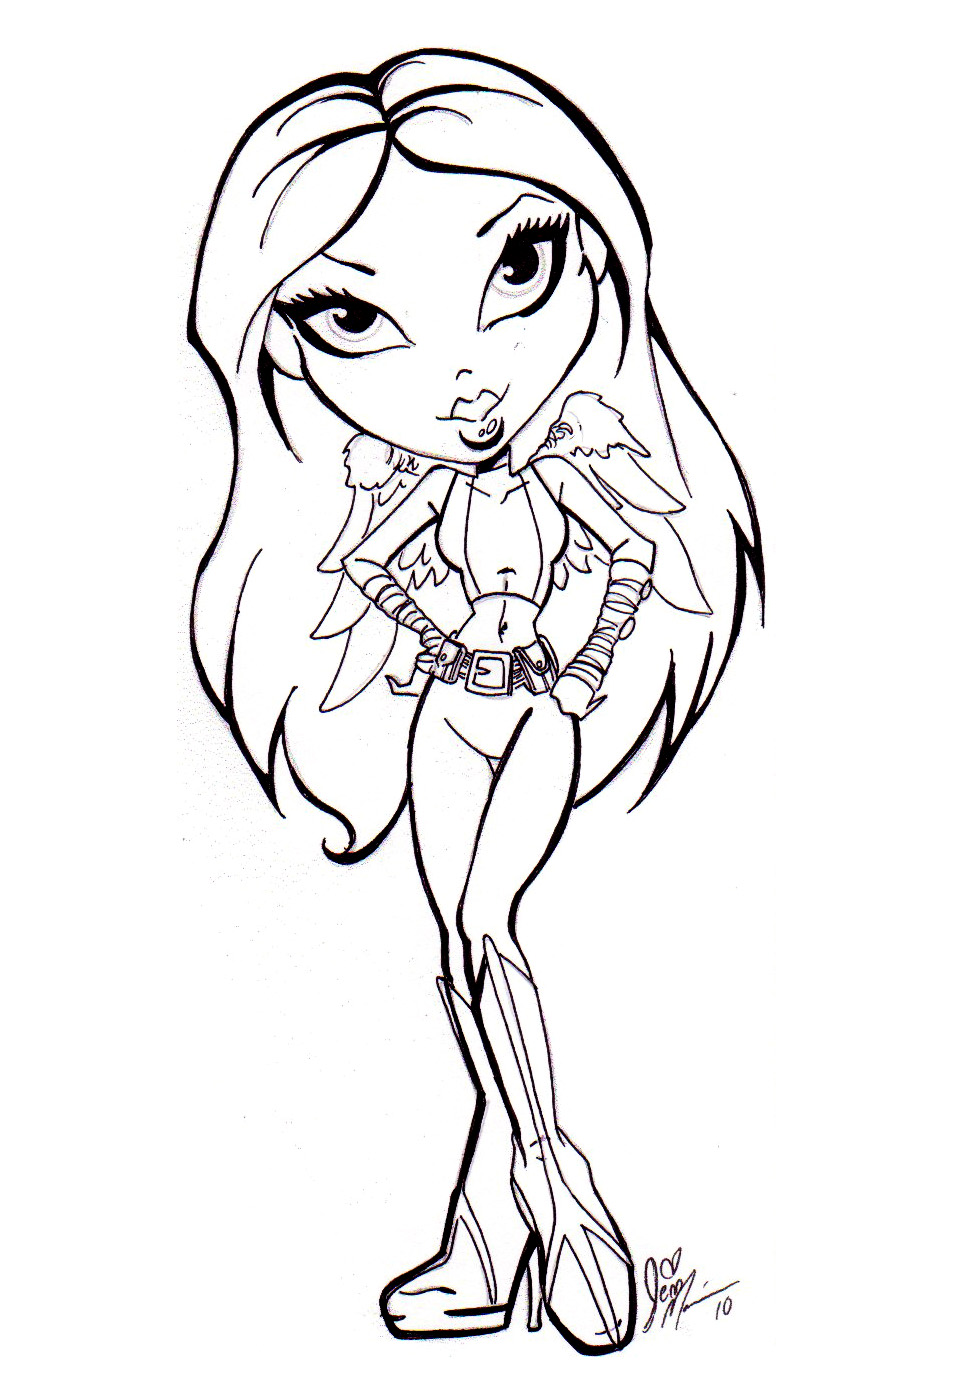 The bratz free to color for children   The Bratz Kids Coloring Pages